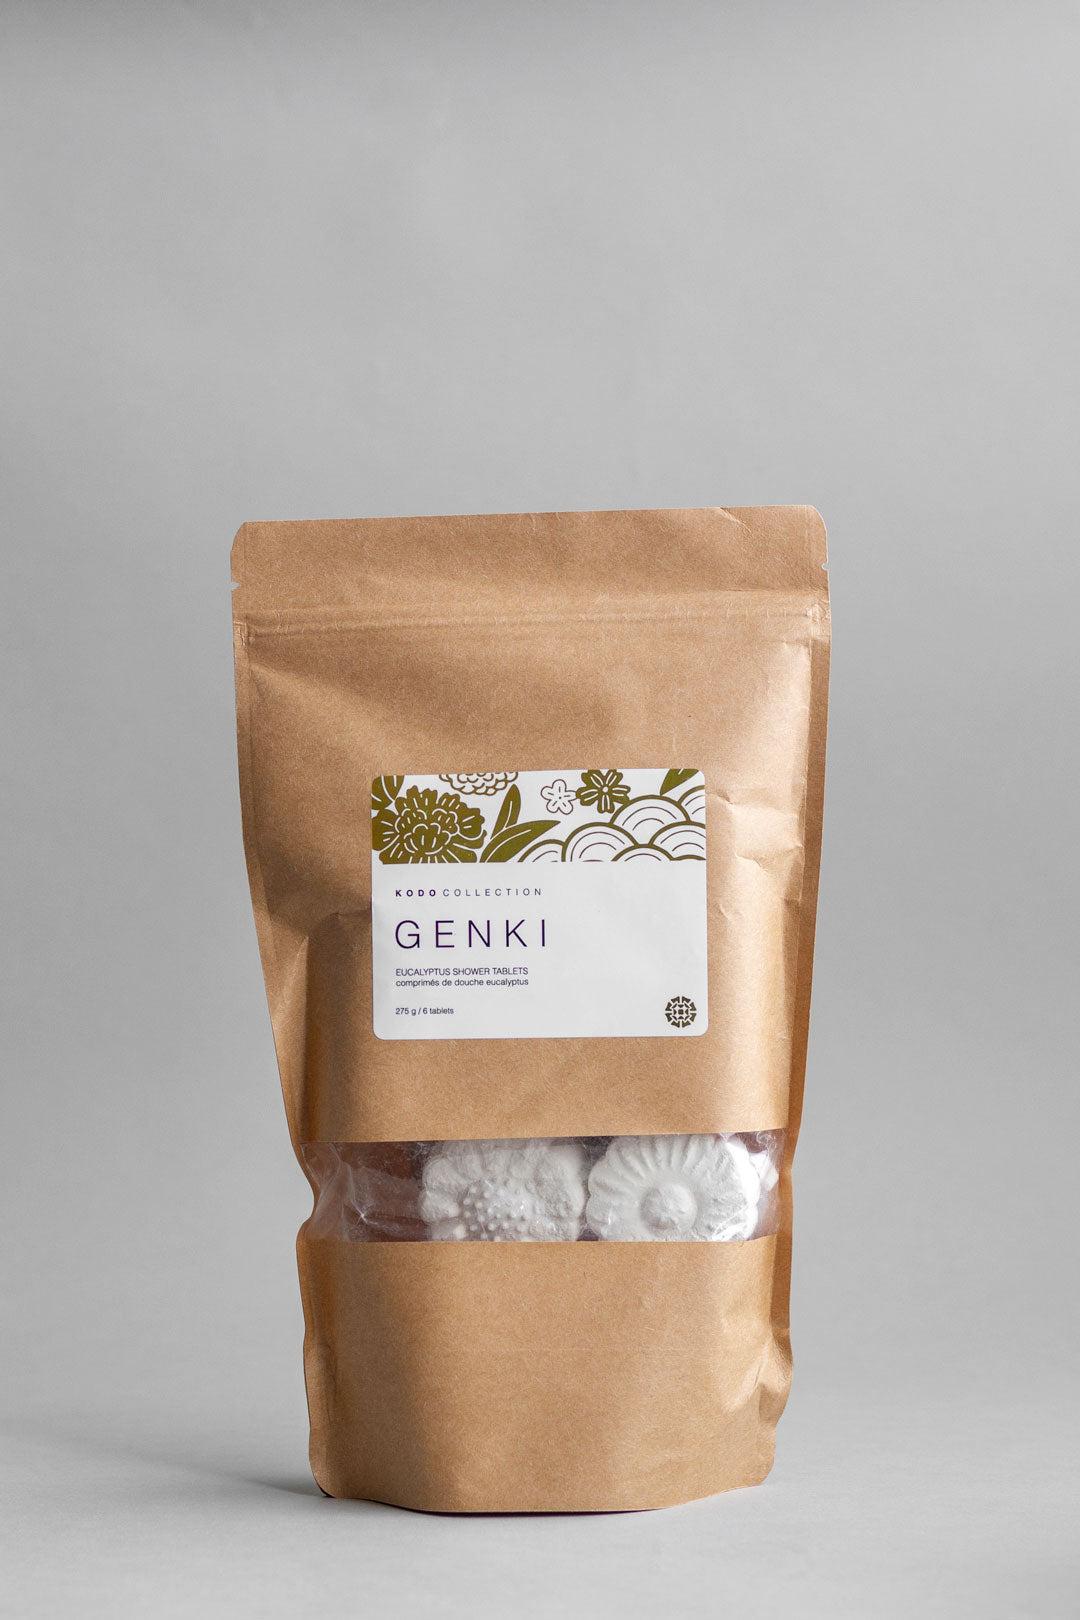 Genki aromatherapy shower tablets by KODO Collection